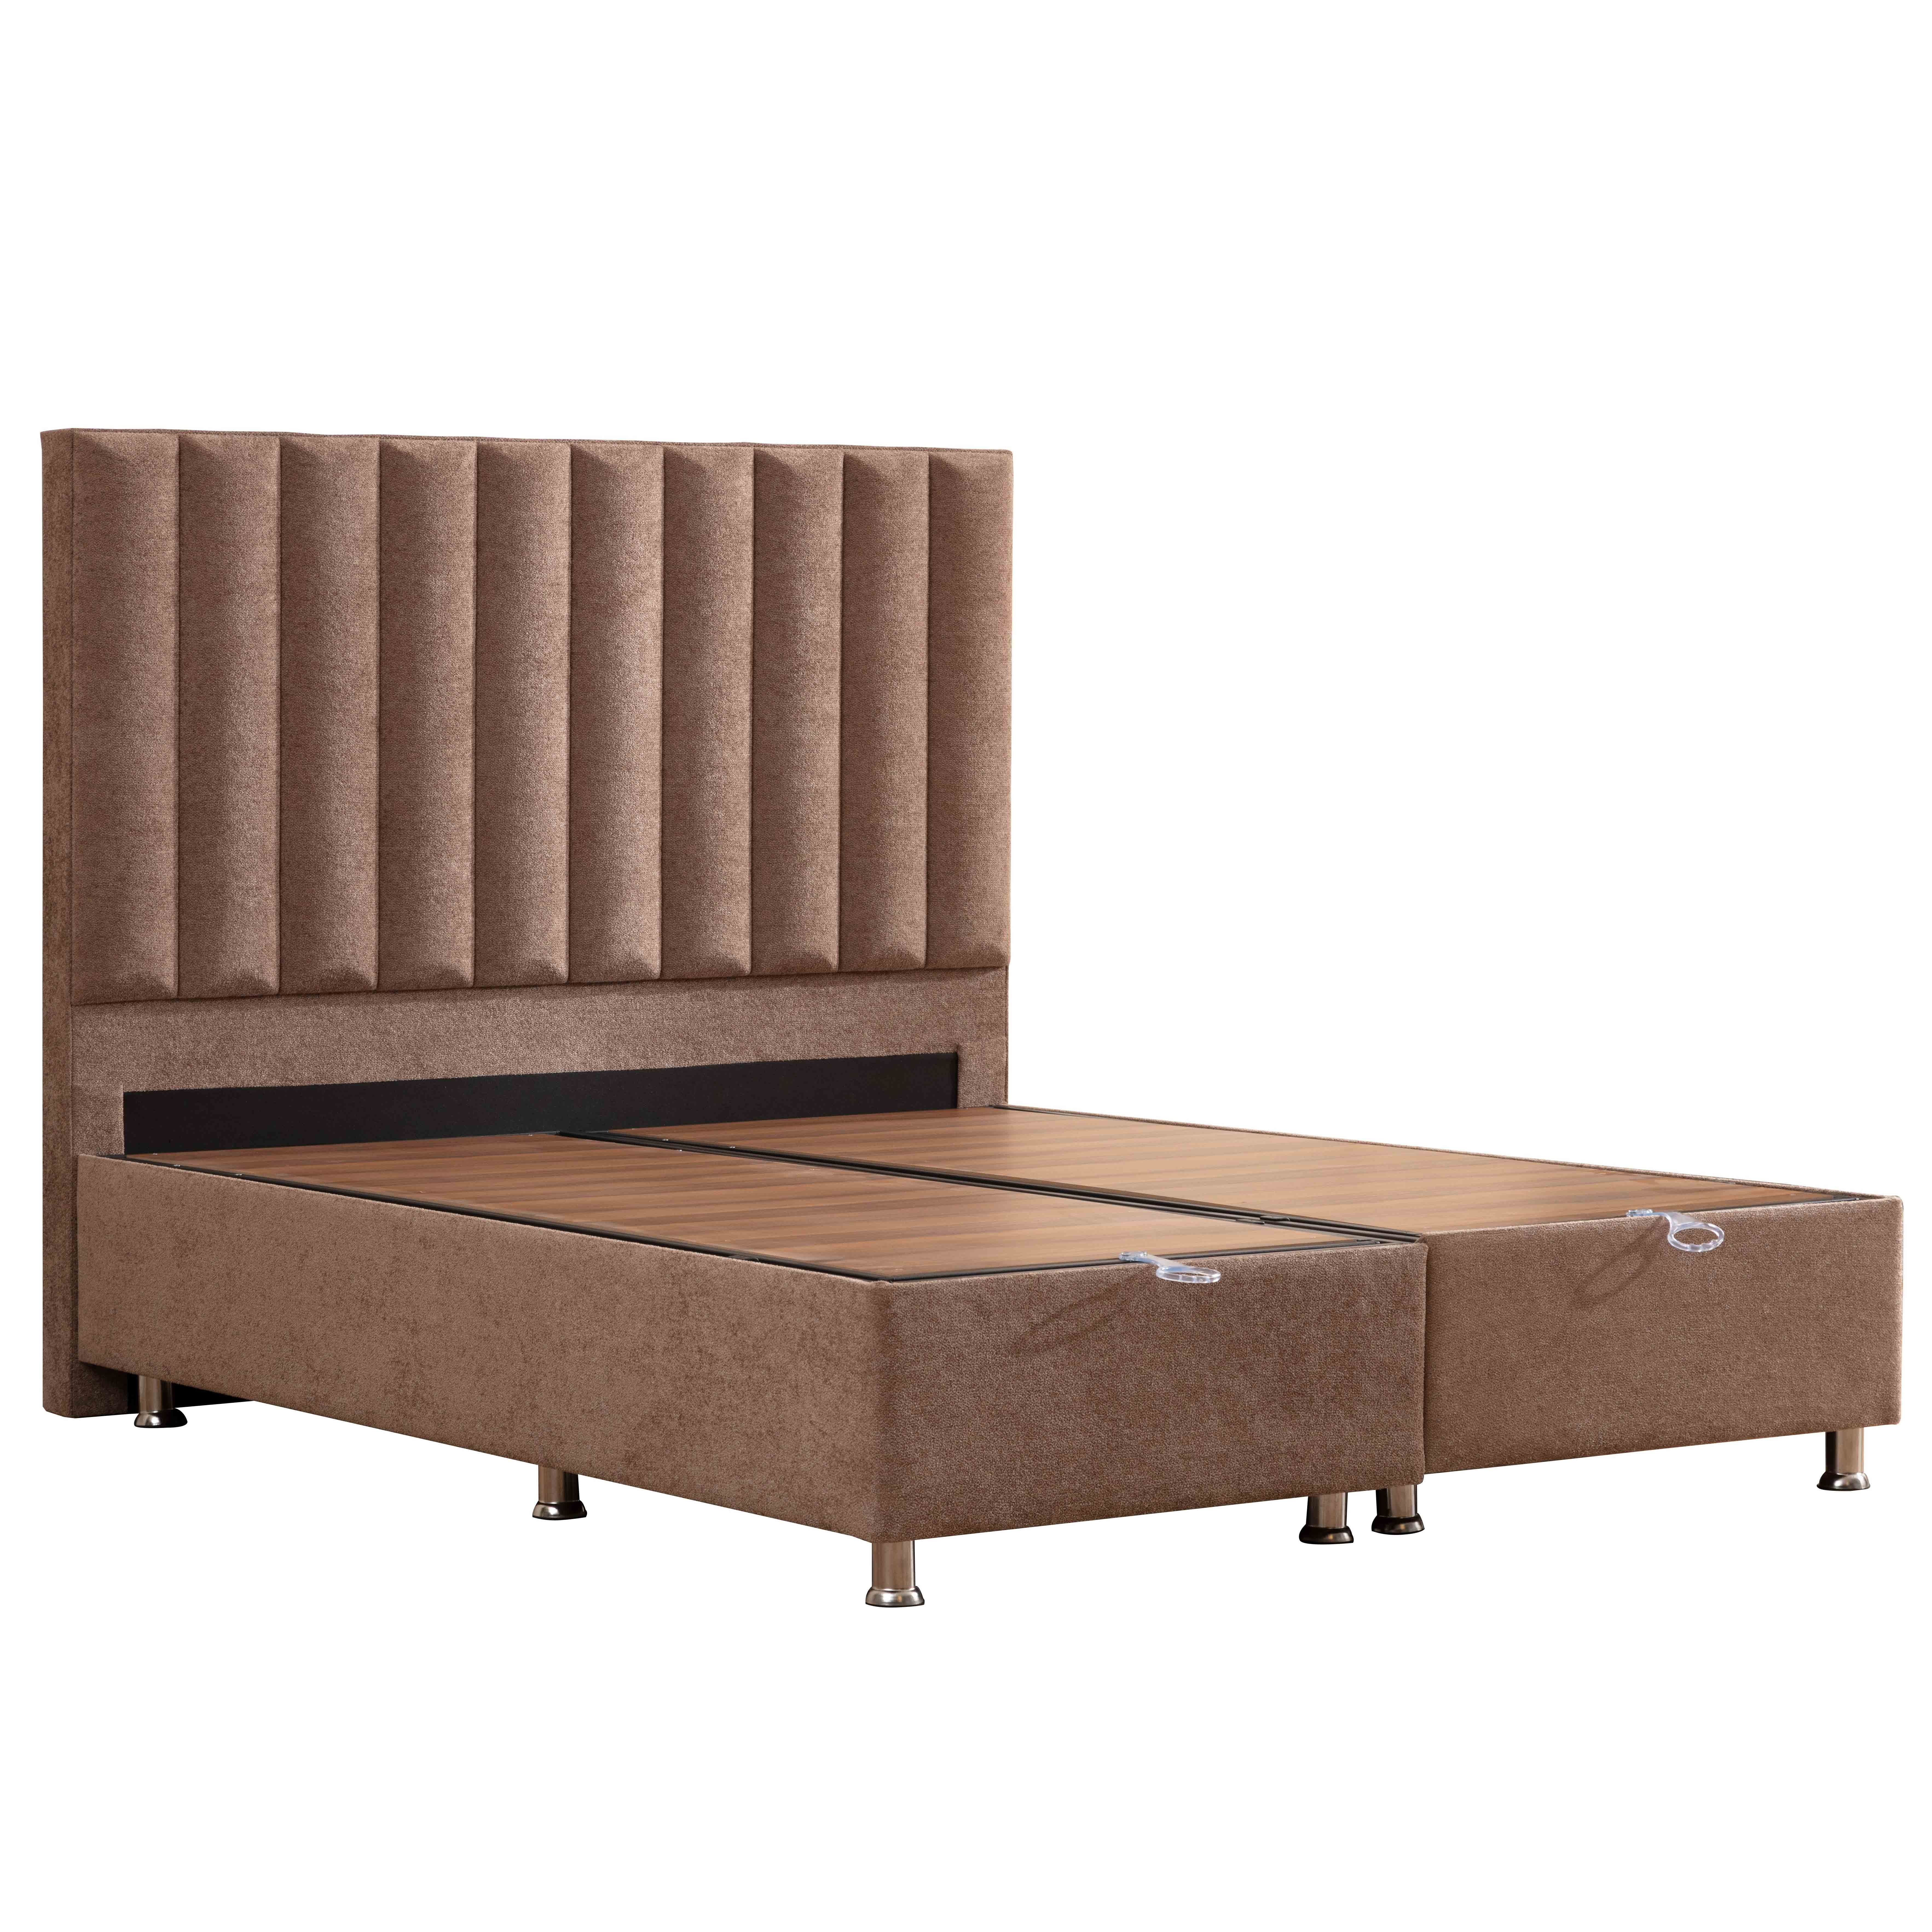 Nice Bed With Storage 160*200